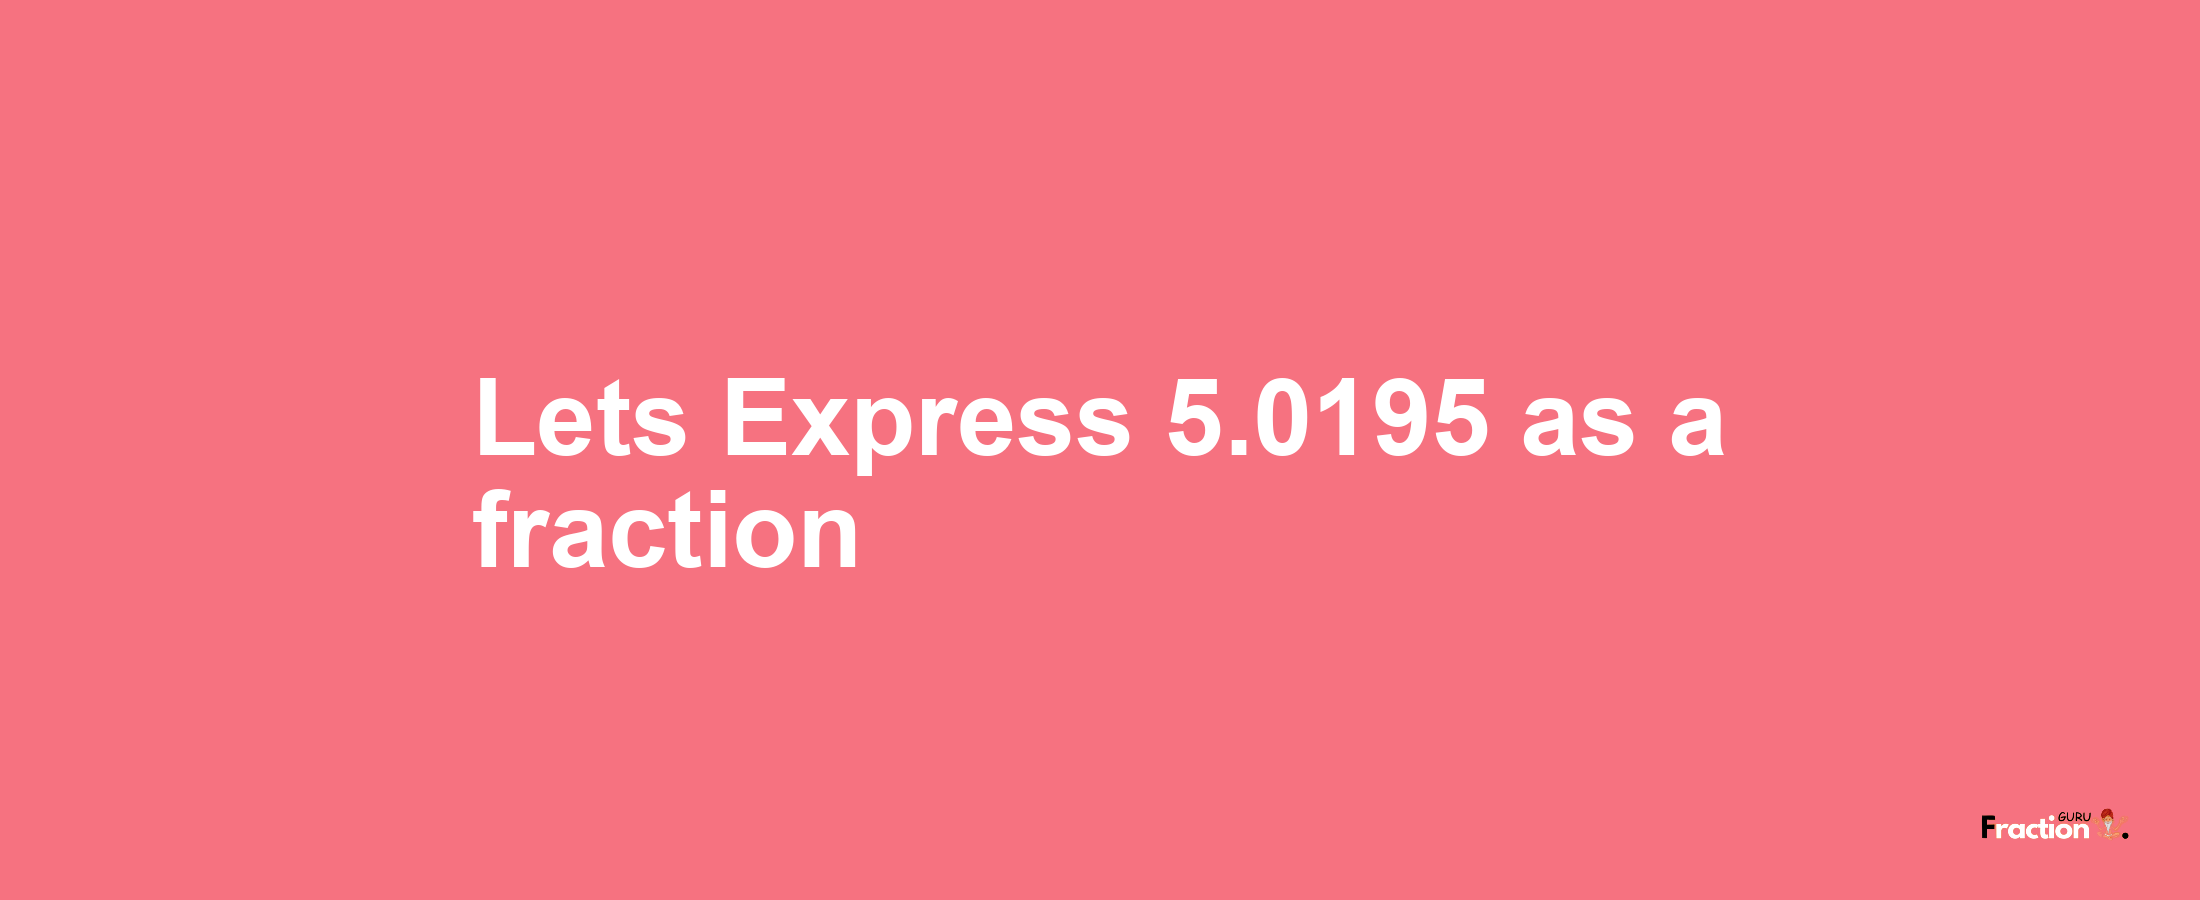 Lets Express 5.0195 as afraction